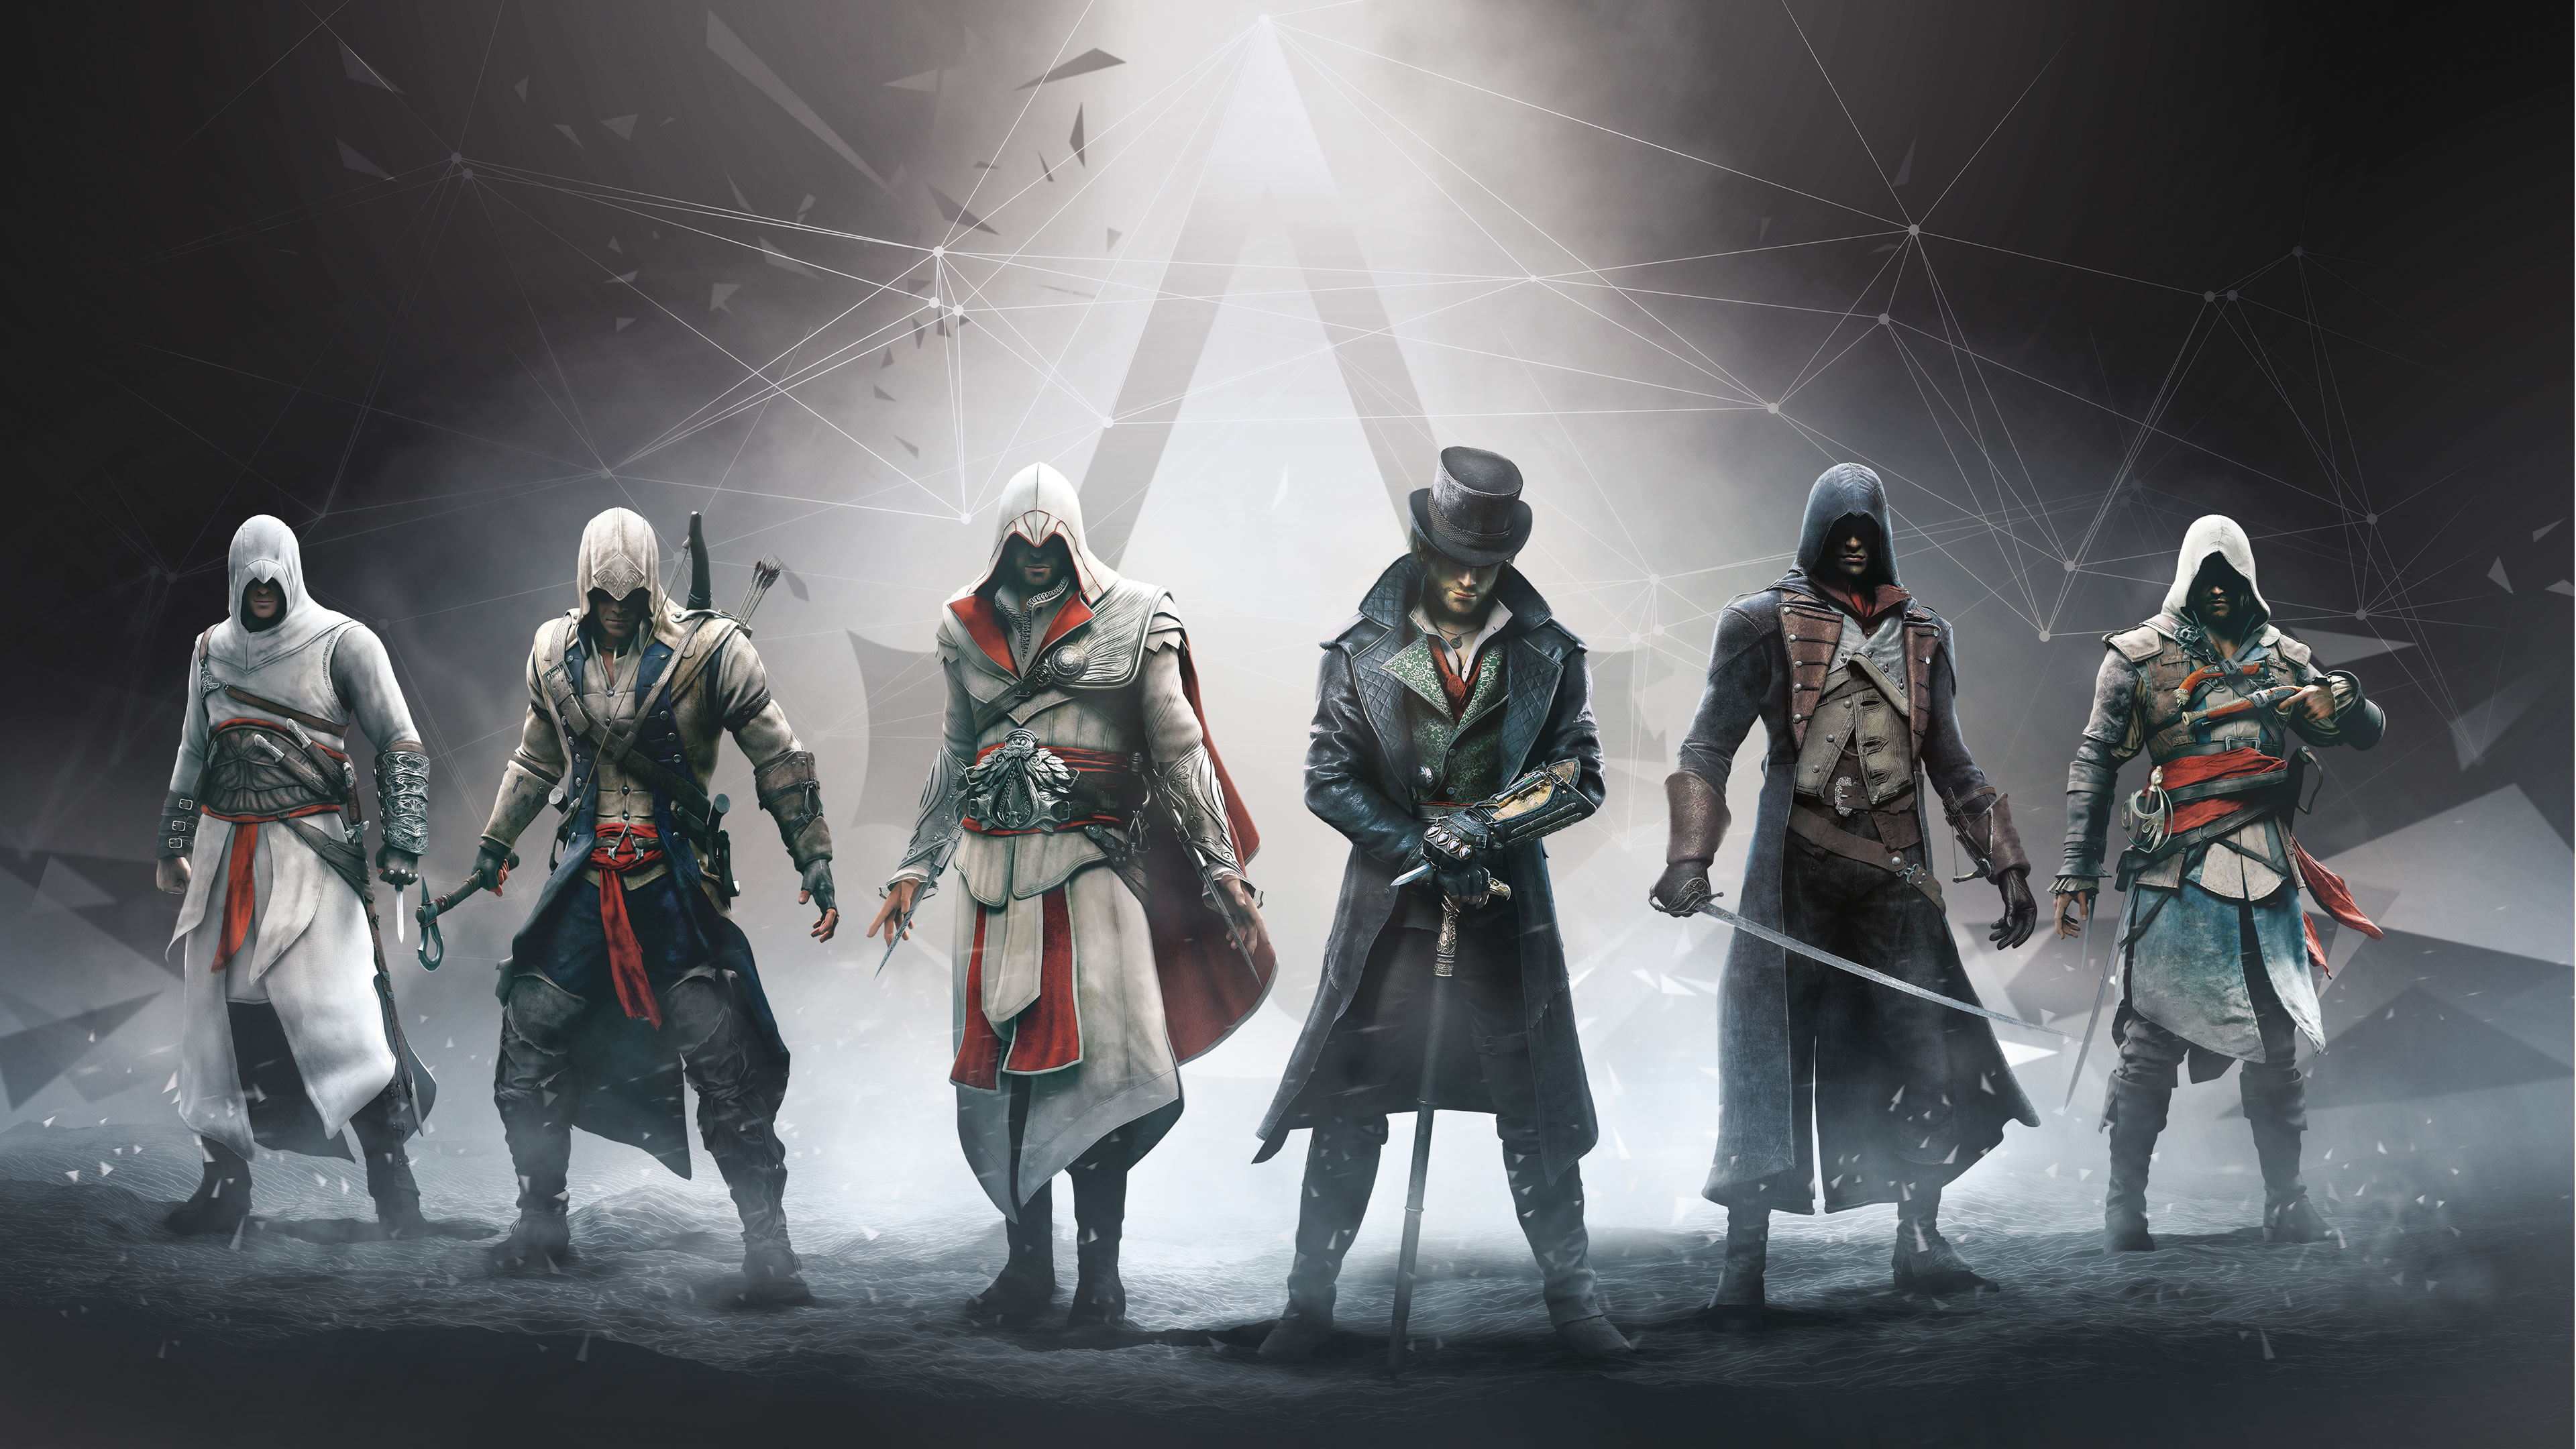 Video Game - Assassin's Creed  Altair Ezio Jacob Frye Connor Edward Kenway Wallpaper